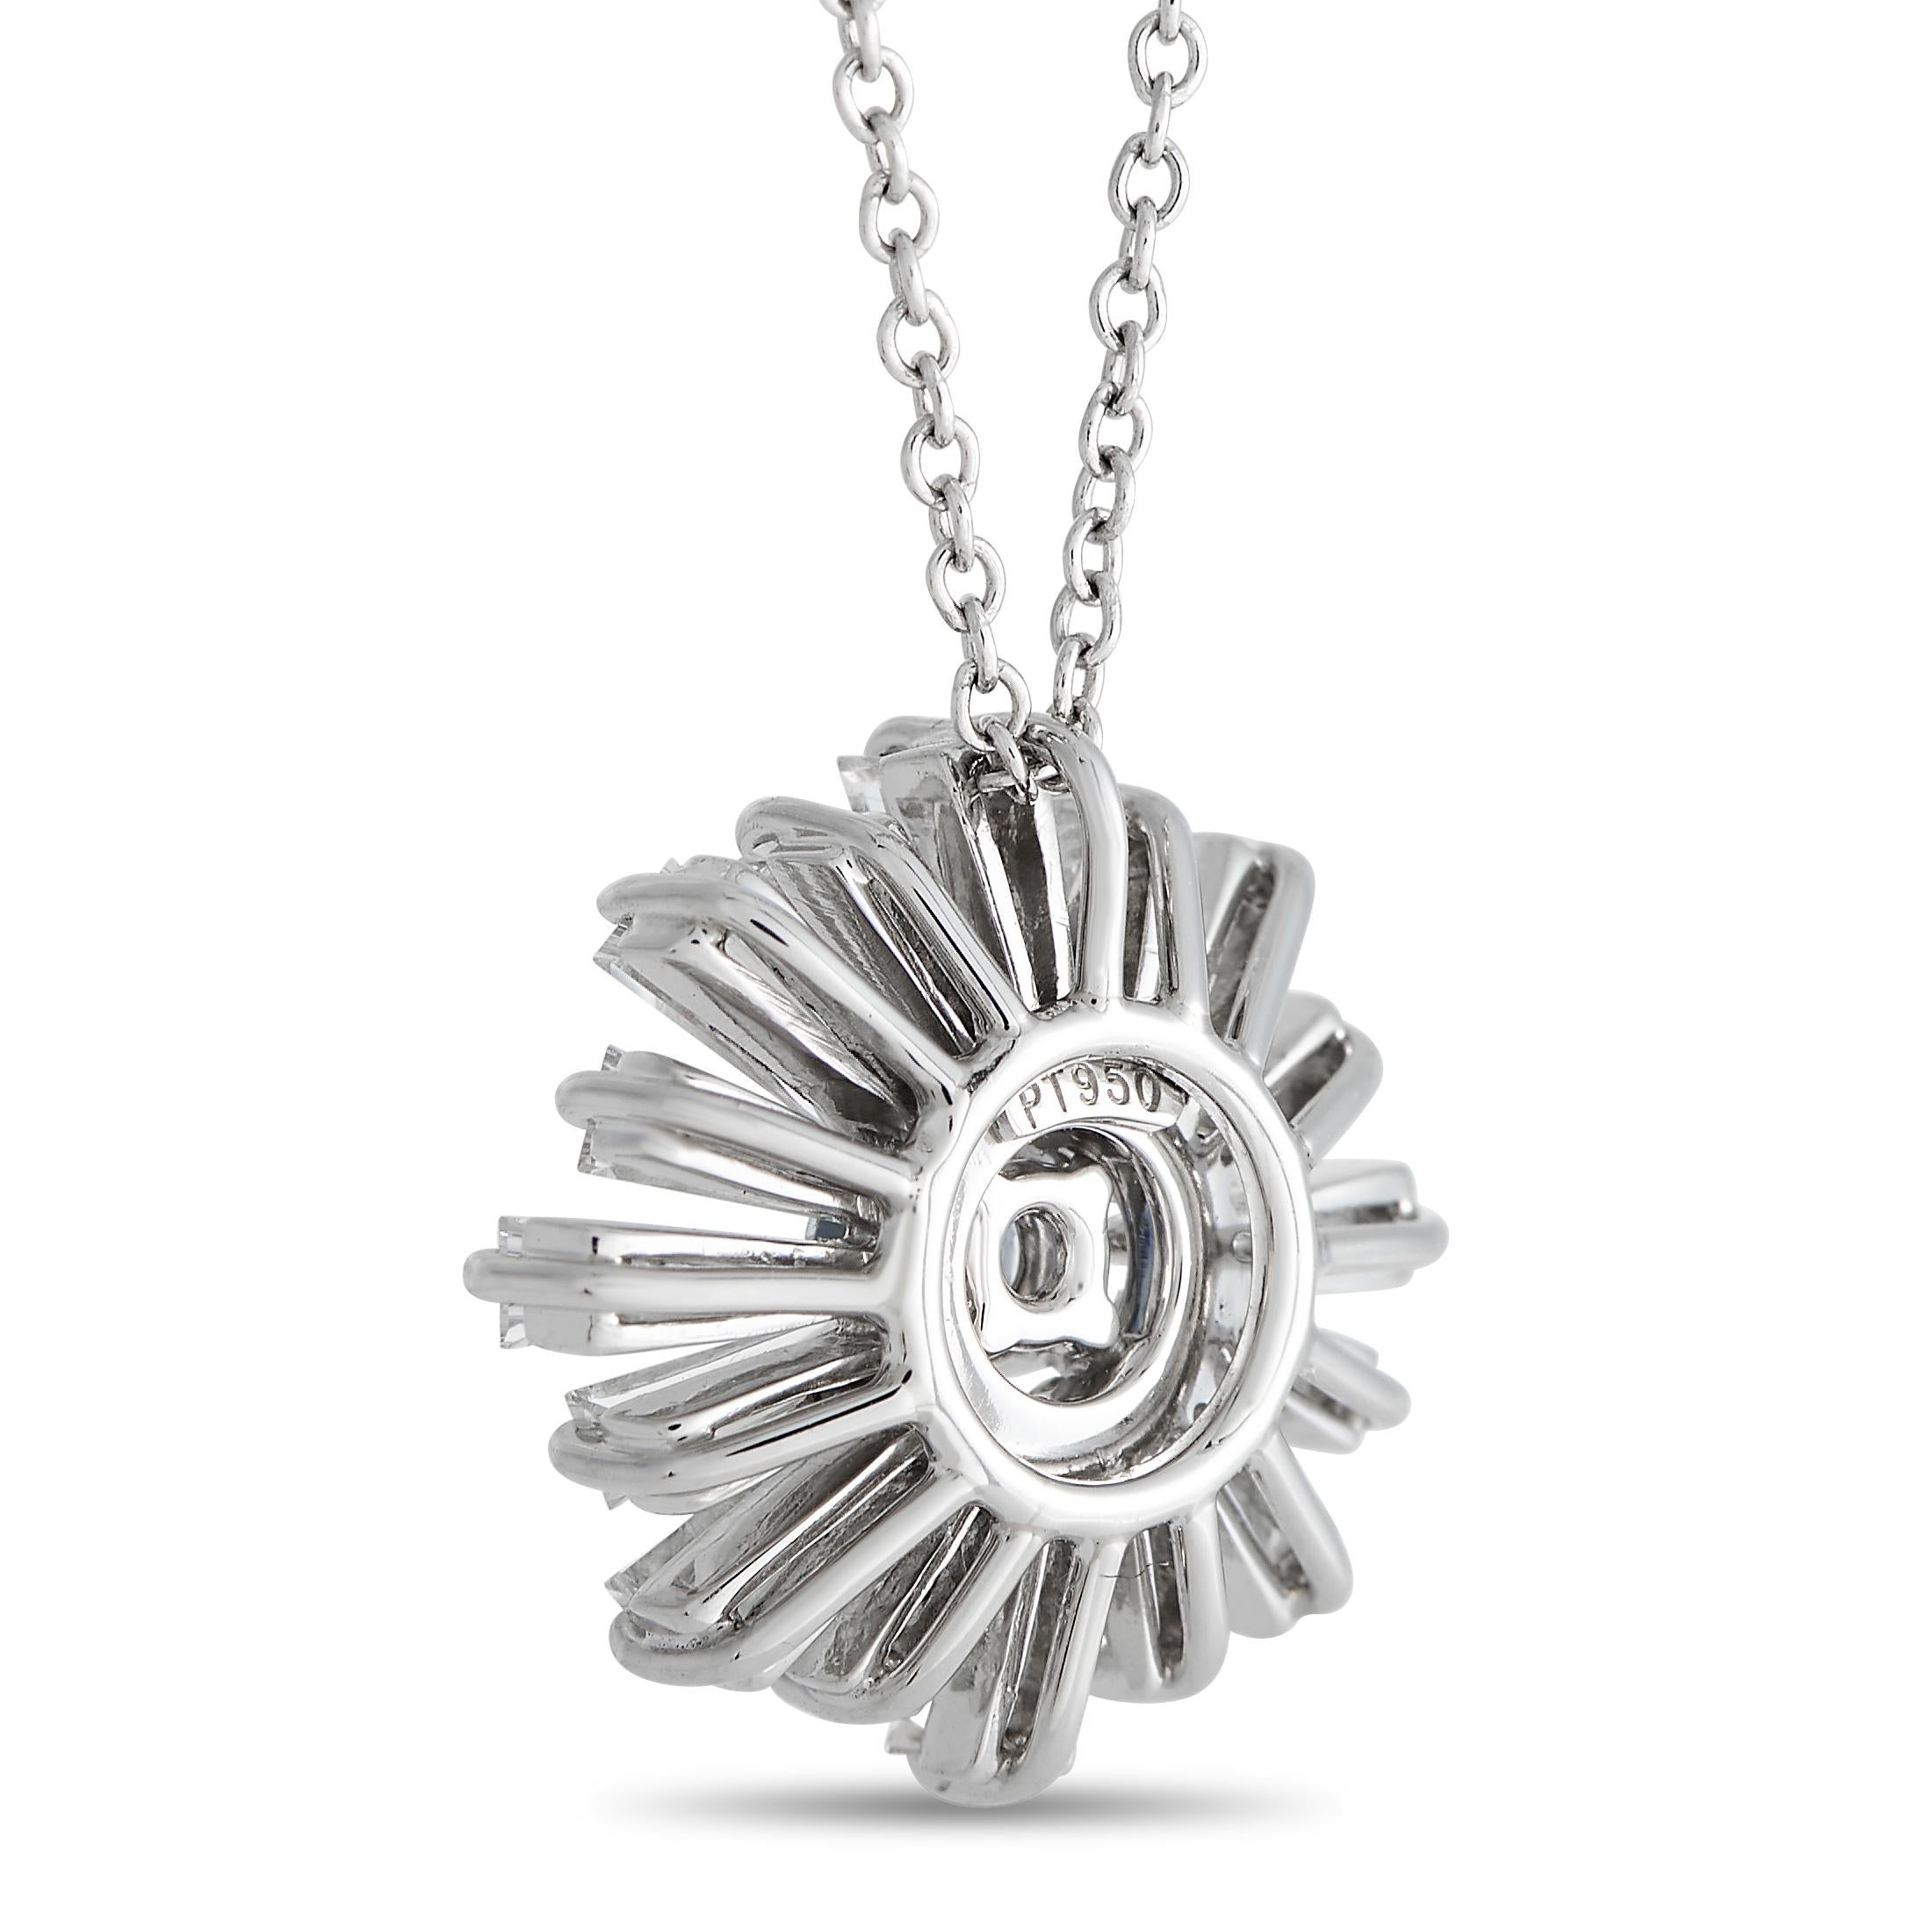 A blue-and-white flower necklace finely crafted in 950 platinum by the King of Diamonds, Harry Winston. This high-jewelry necklace features a stunning pendant of a daisy-like silhouette, masterfully created with 18 baguette diamond petals and a